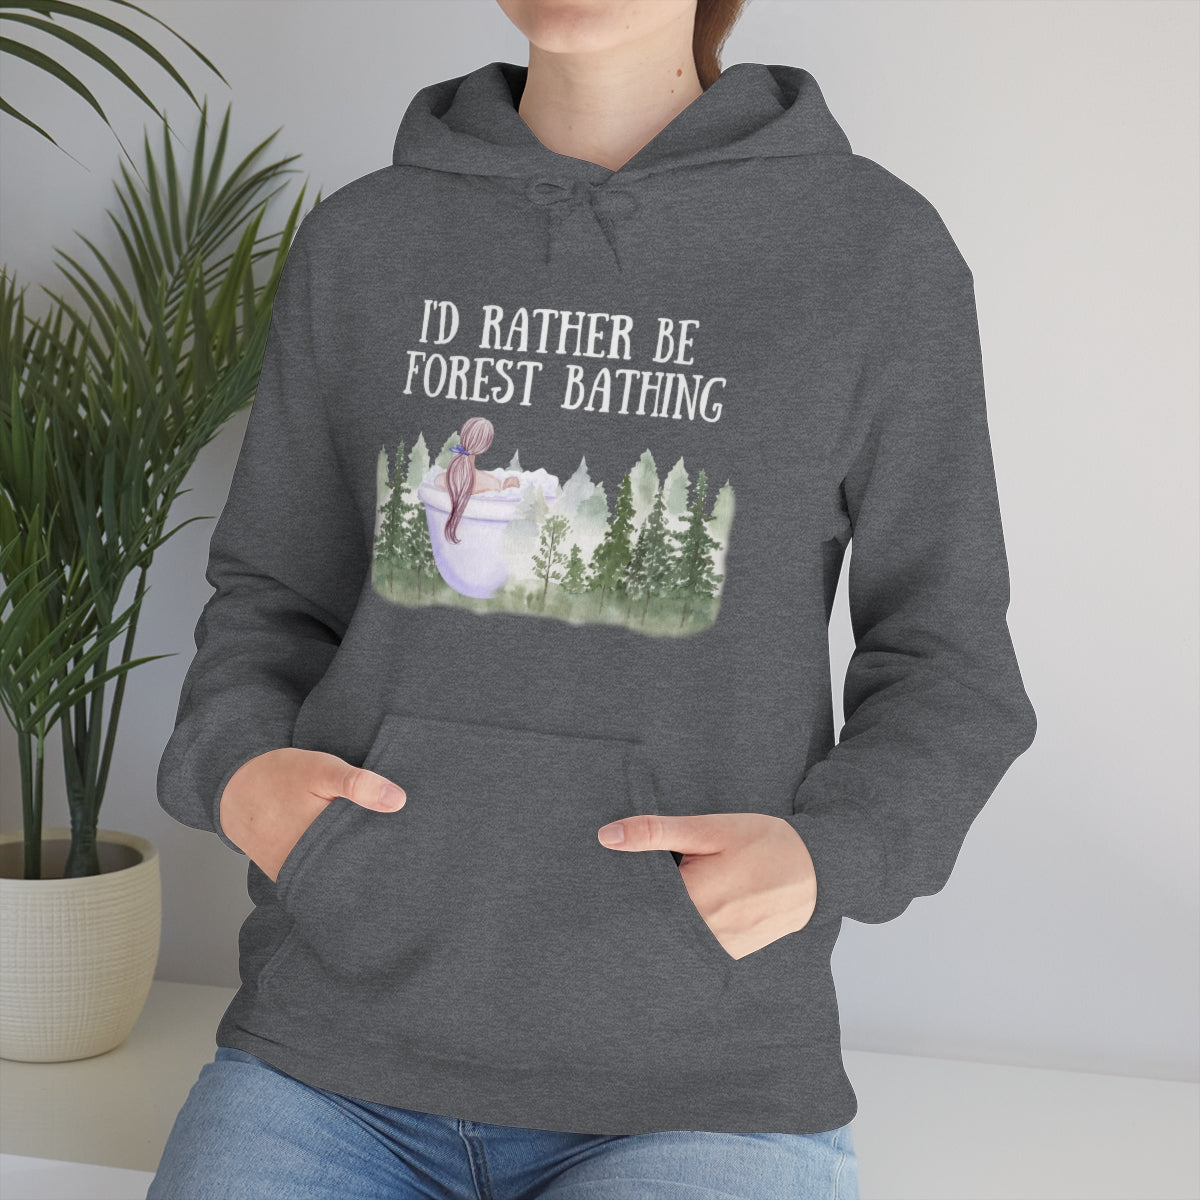 I'd Rather be Forest Bathing